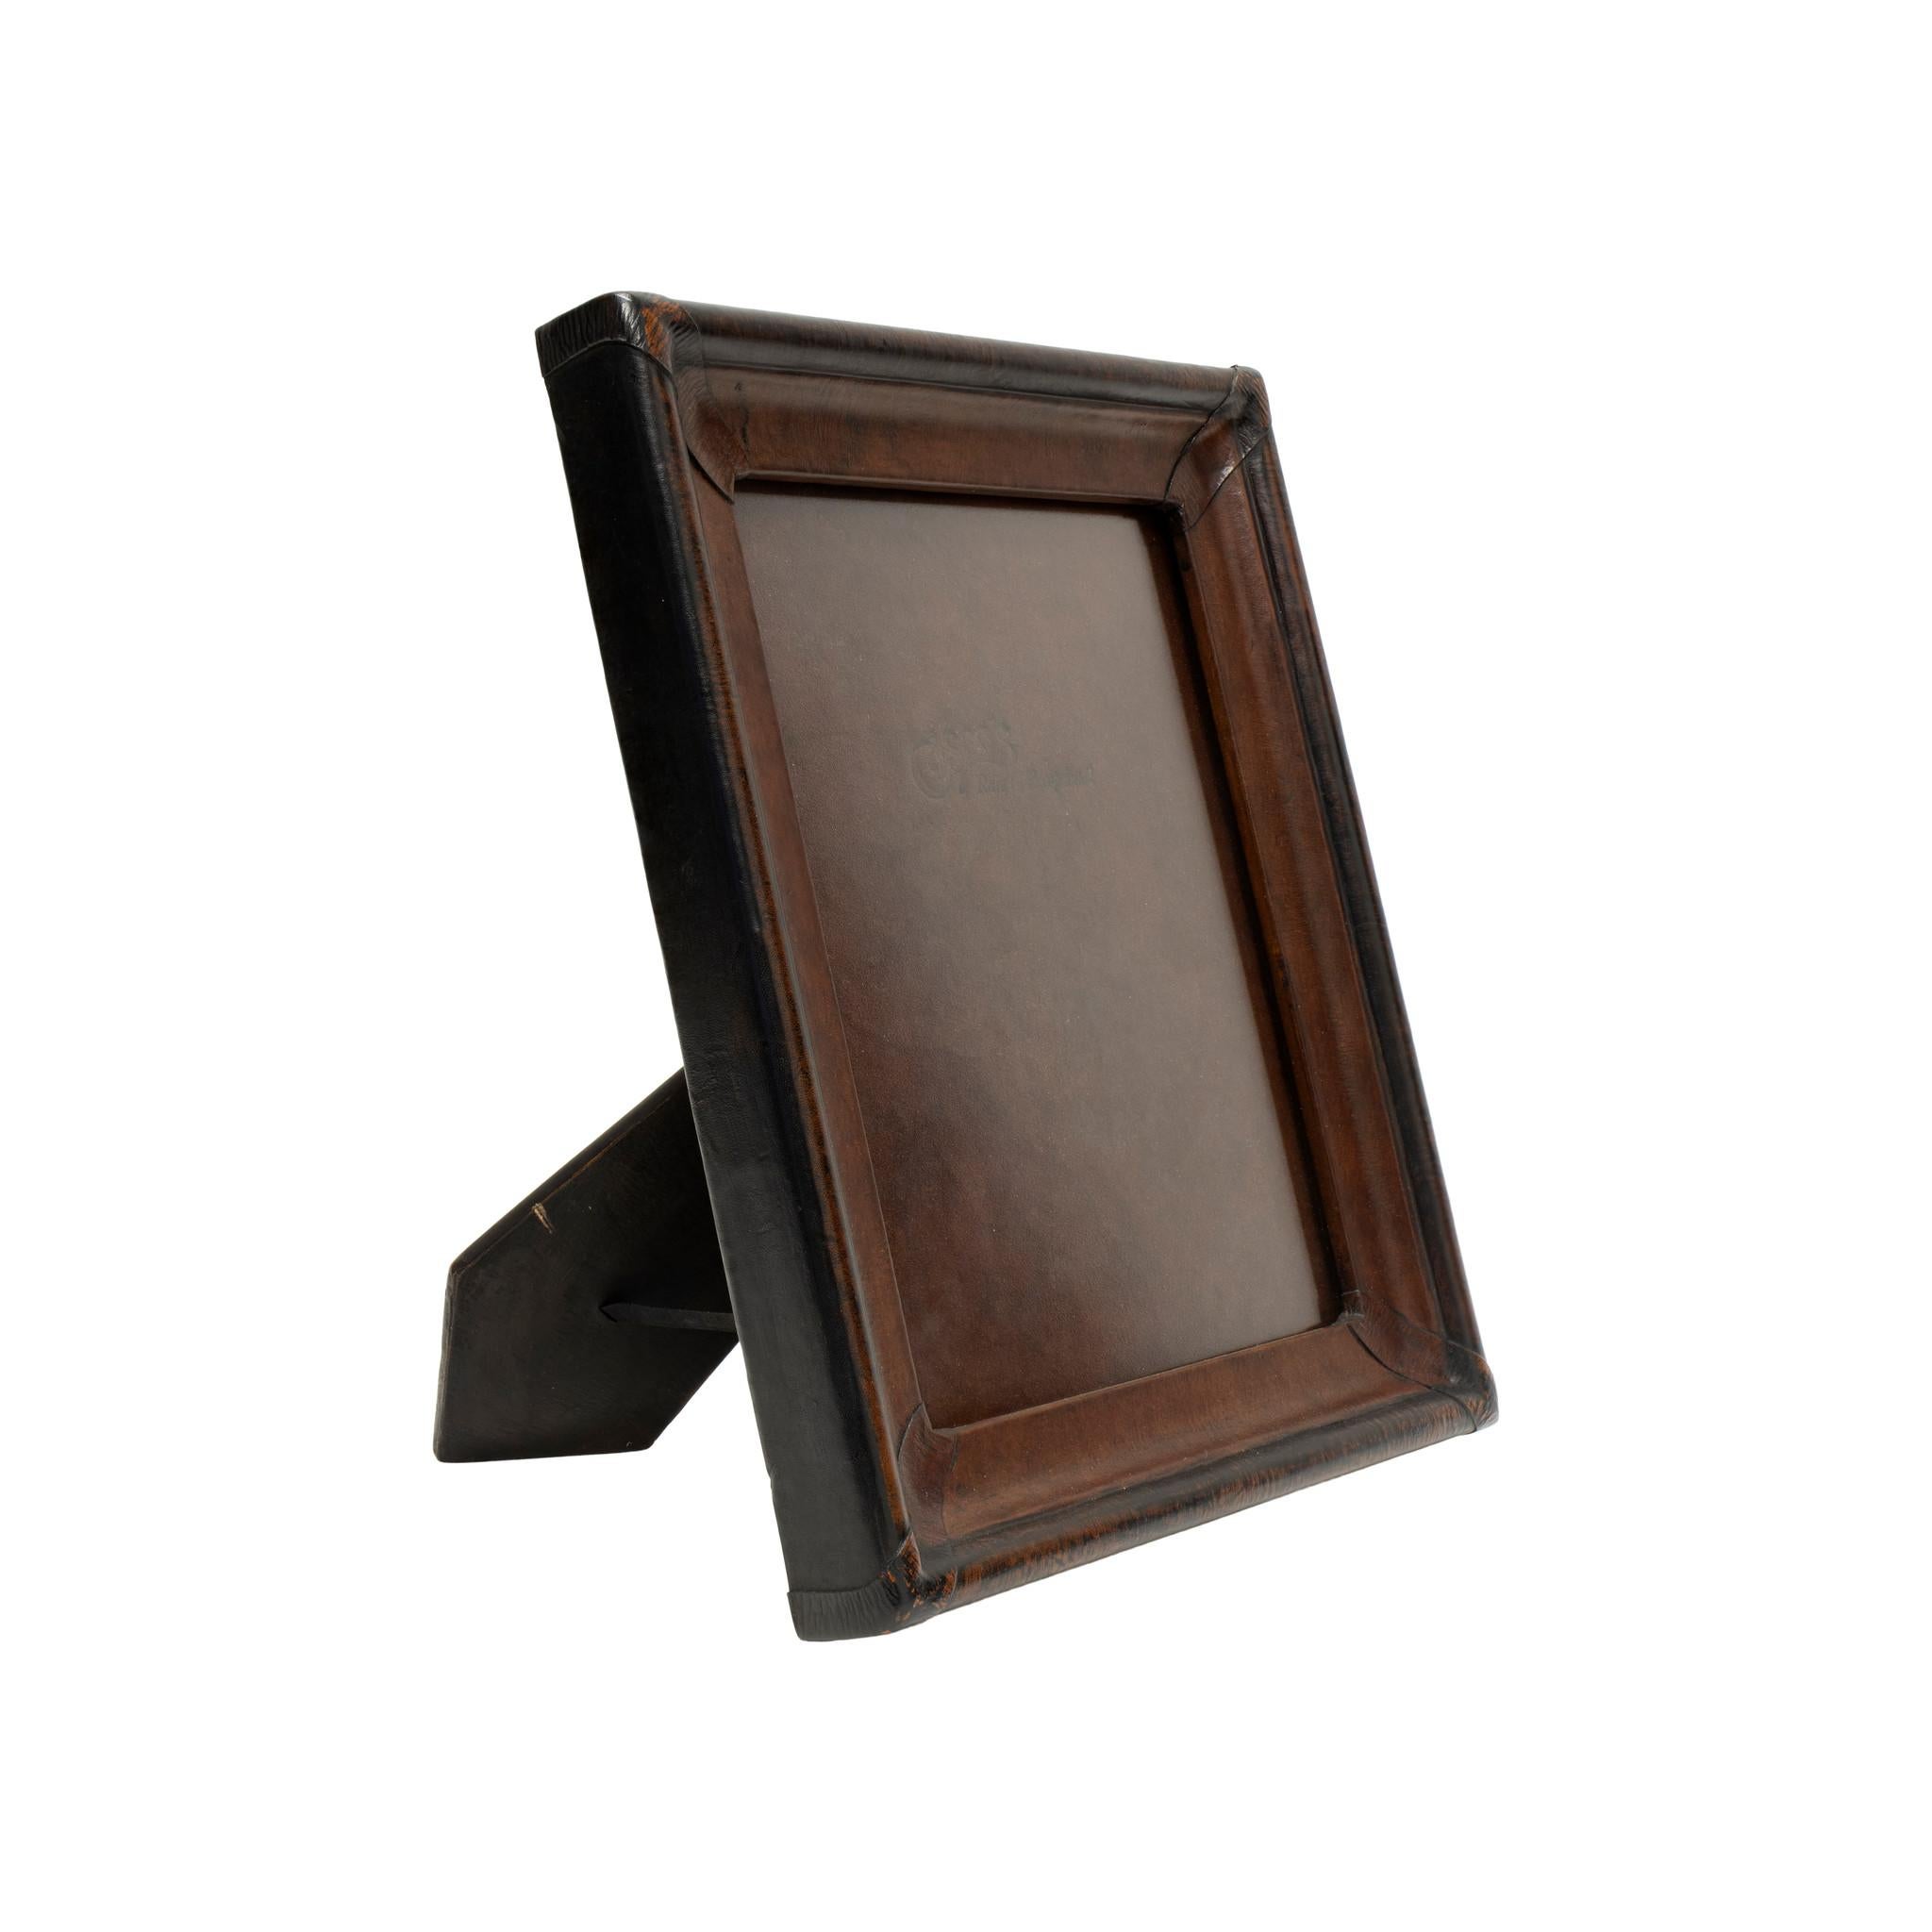 Contemporary 4x6 Dark Brown & Black Leather Tabletop Picture Frame - The Dressage For Sale